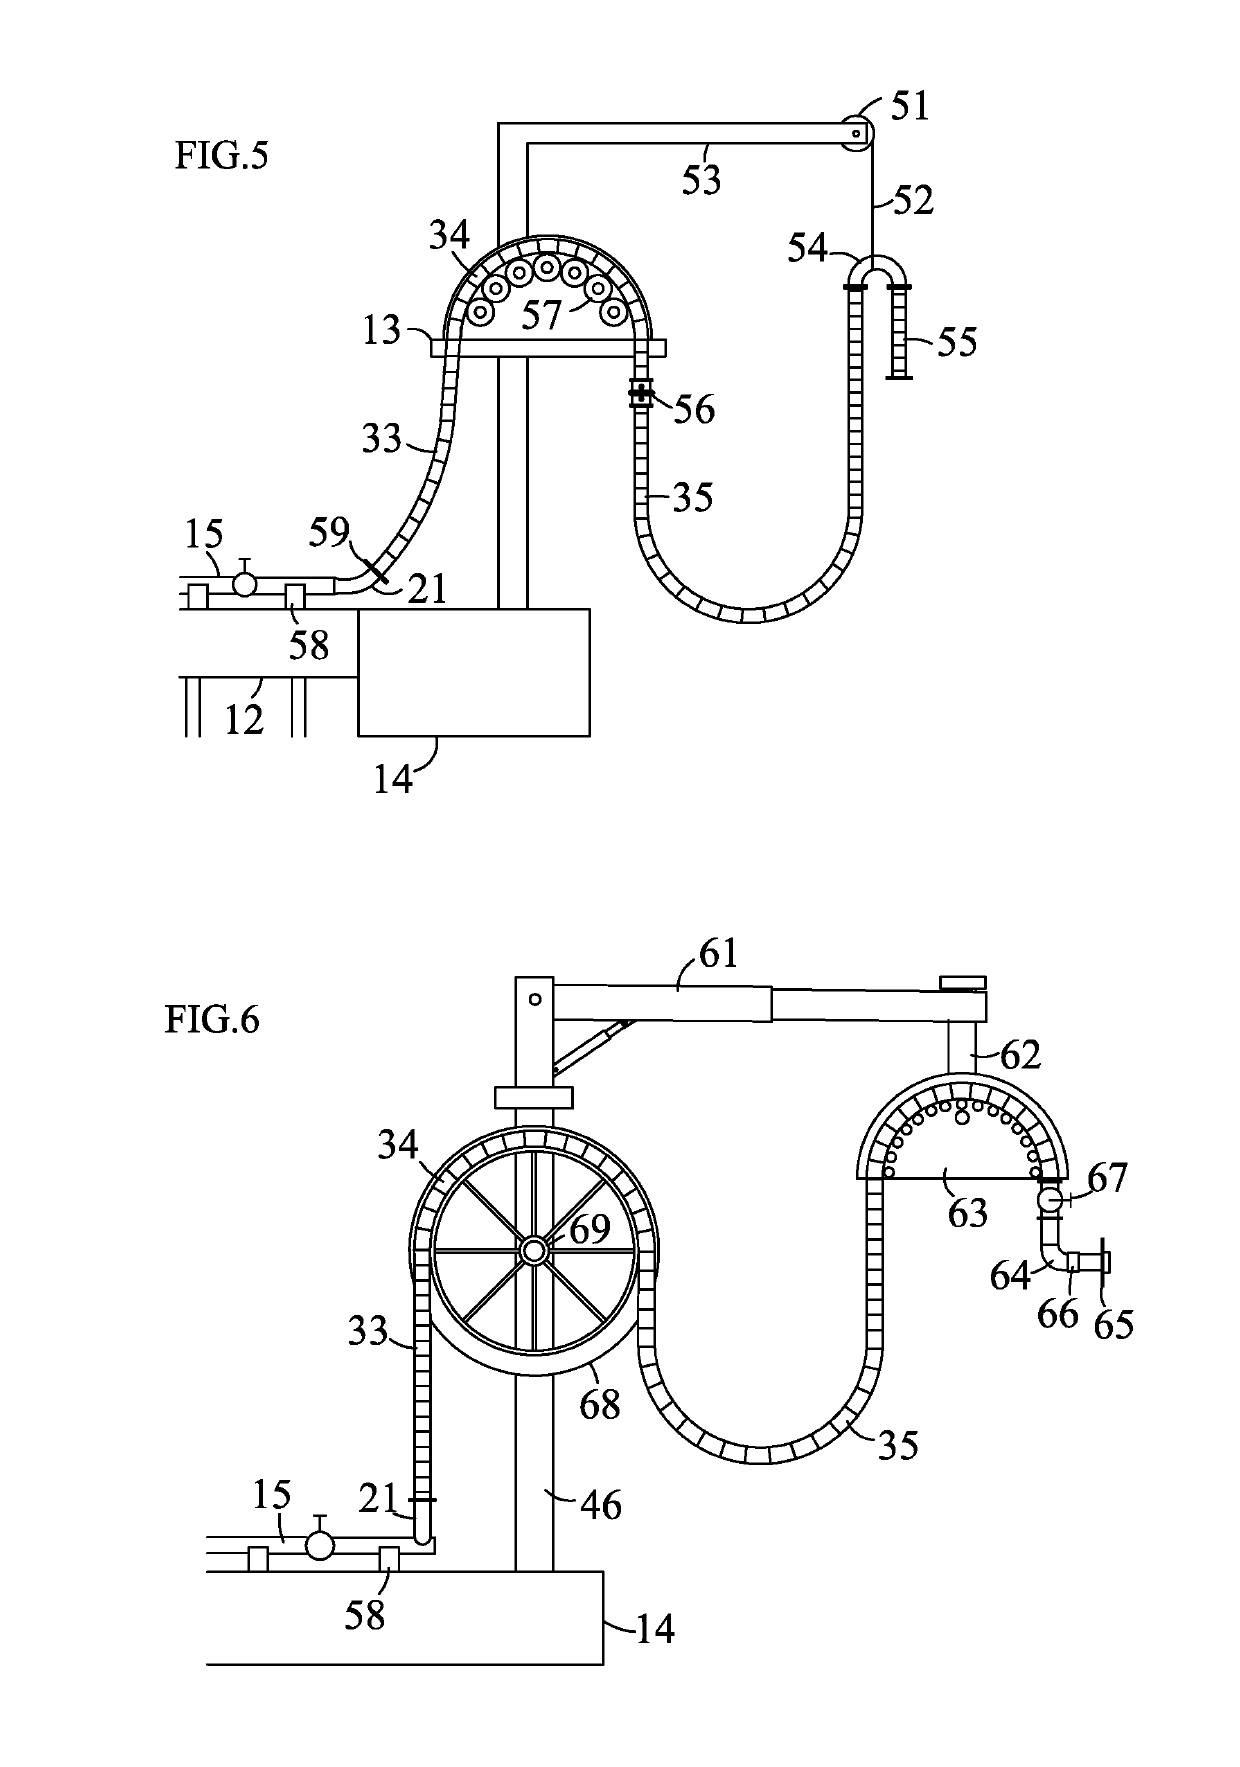 Auto-balancing hose system and method for fluid transfer